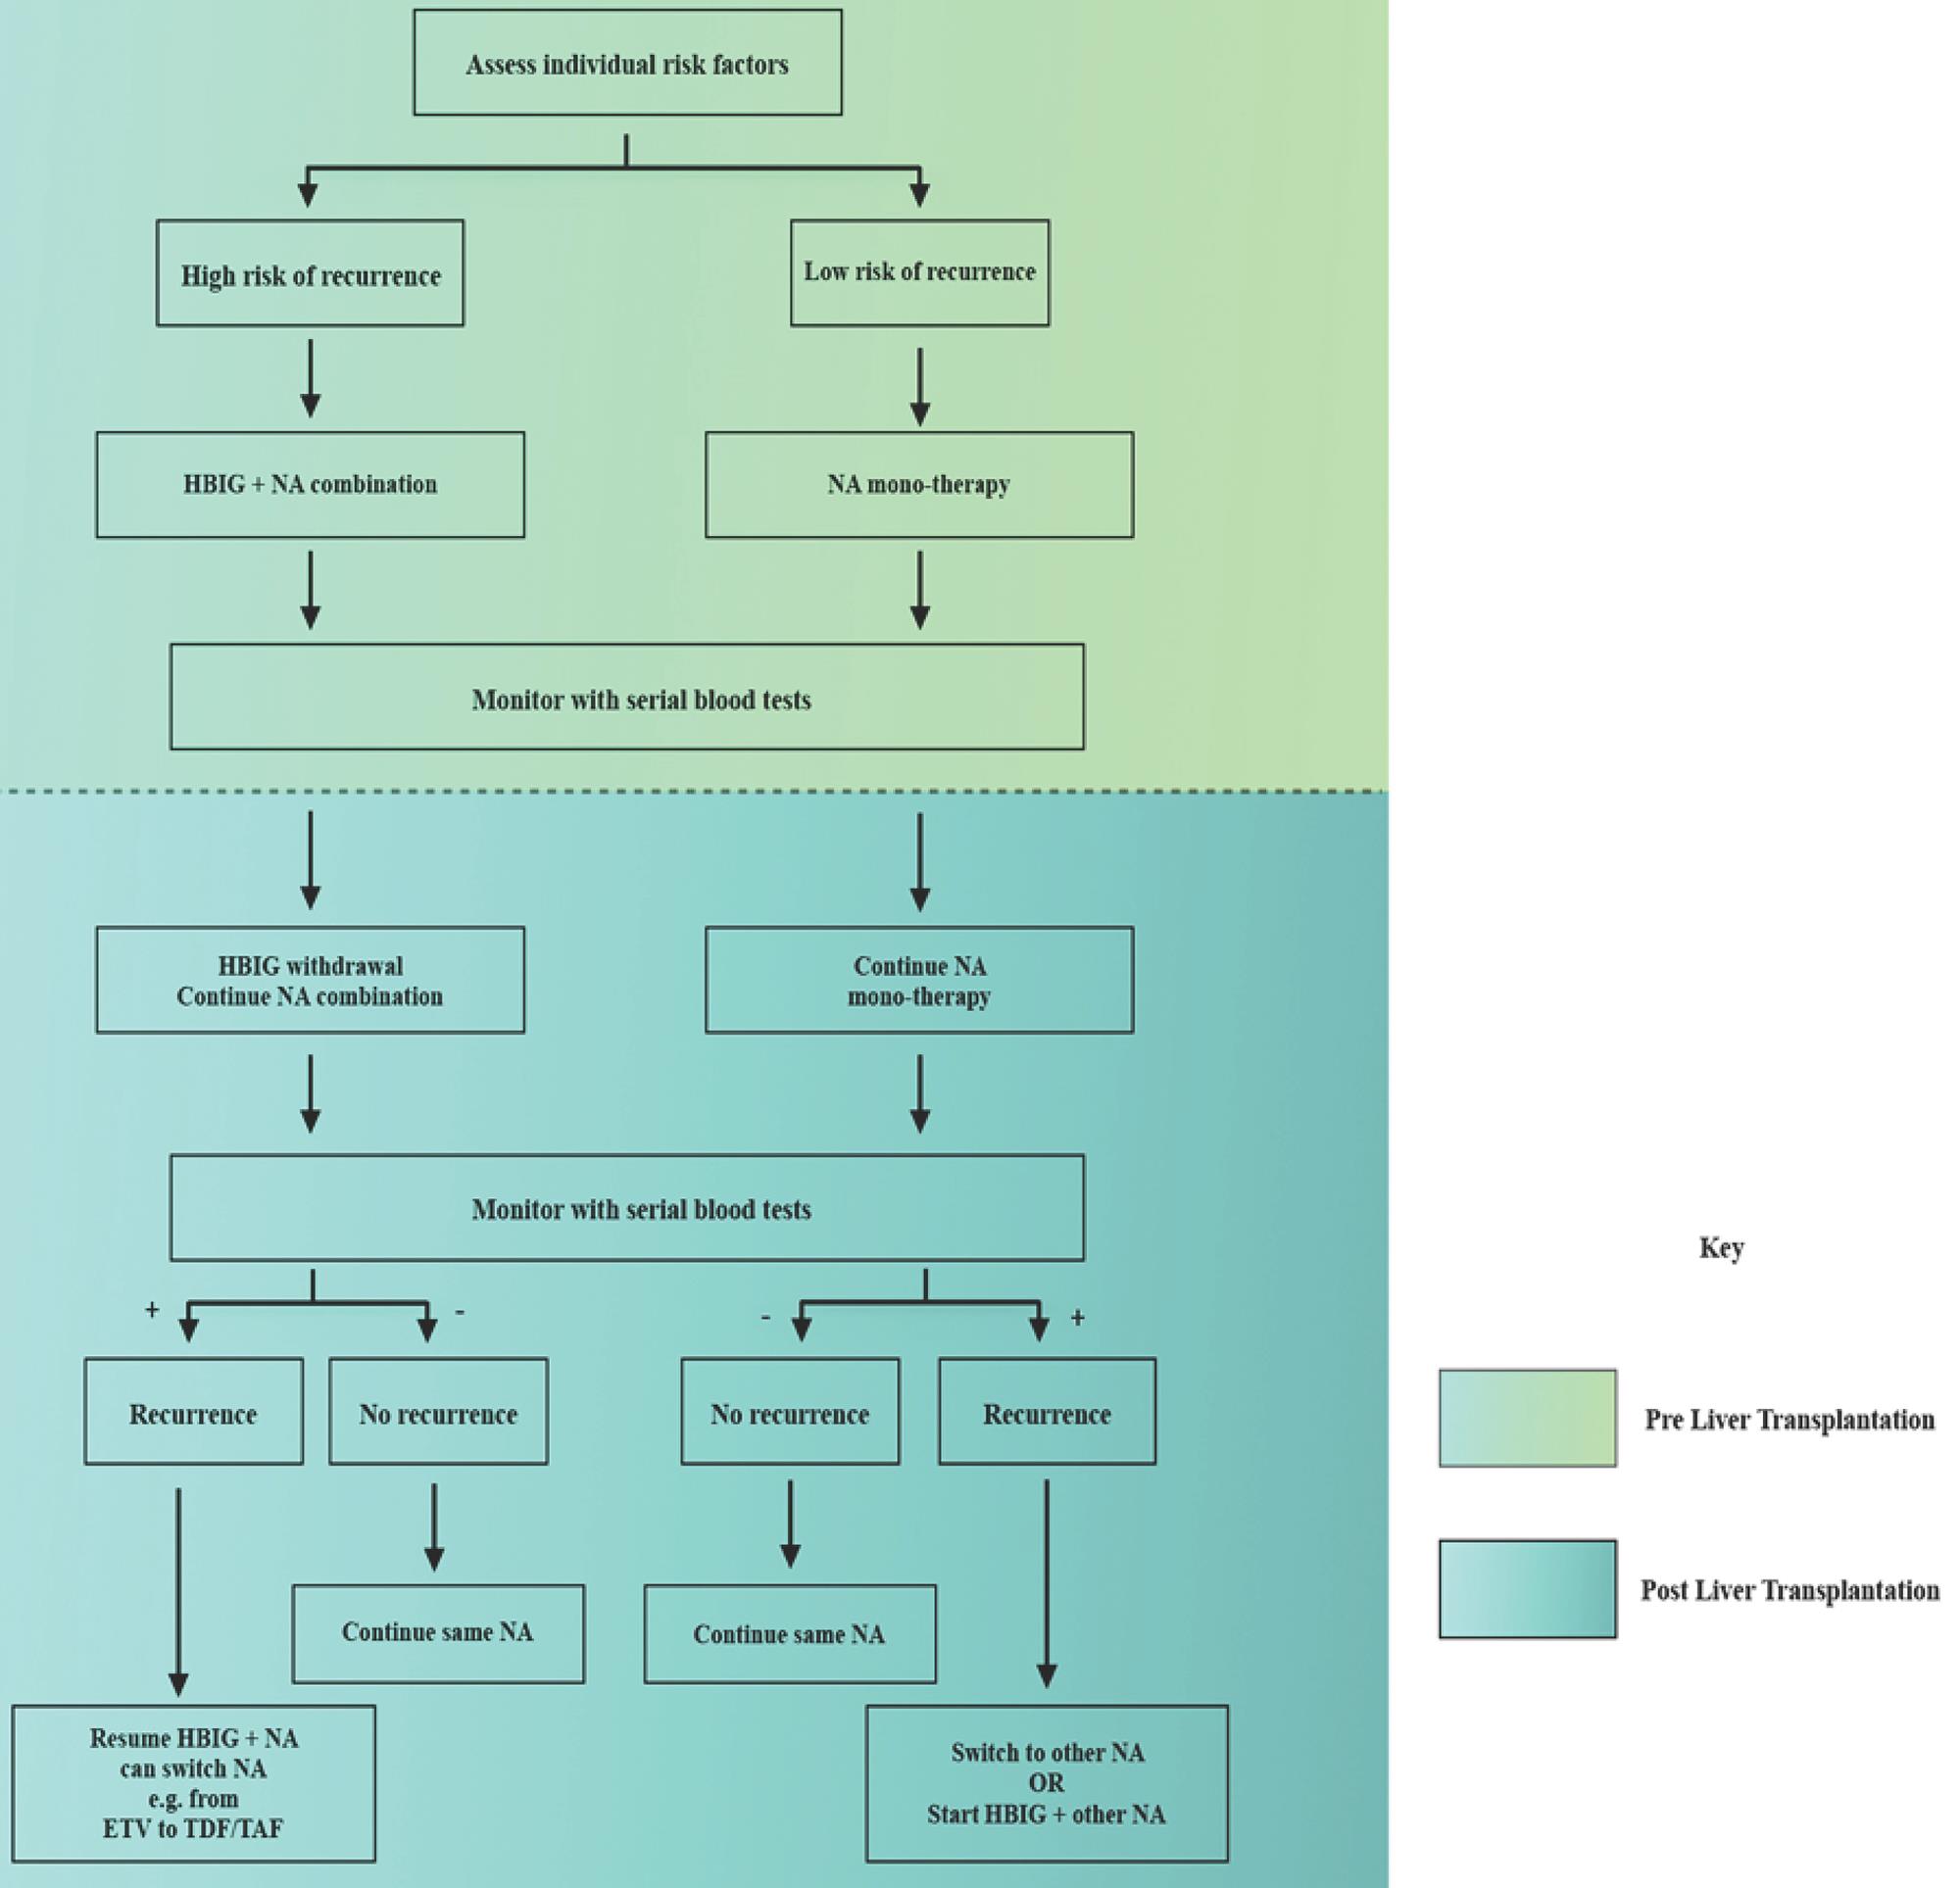 An algorithm for suggested approach towards prevention and management of HBV recurrence in post-liver transplant patients.